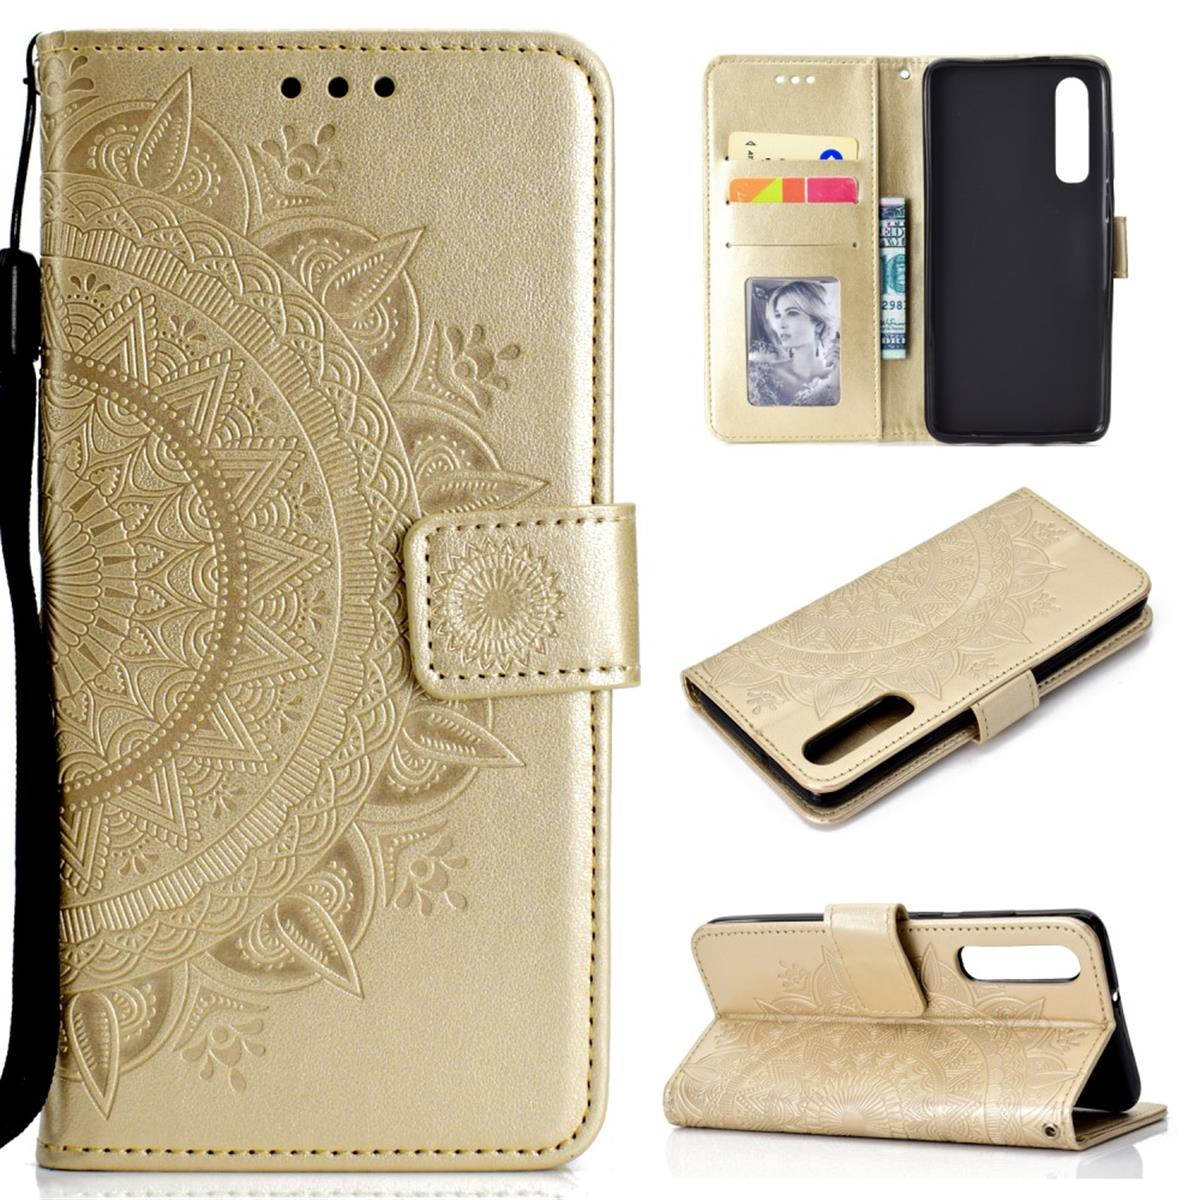 COVERKINGZ Klapphülle mit Huawei, Muster, Gold P30, Mandala Bookcover